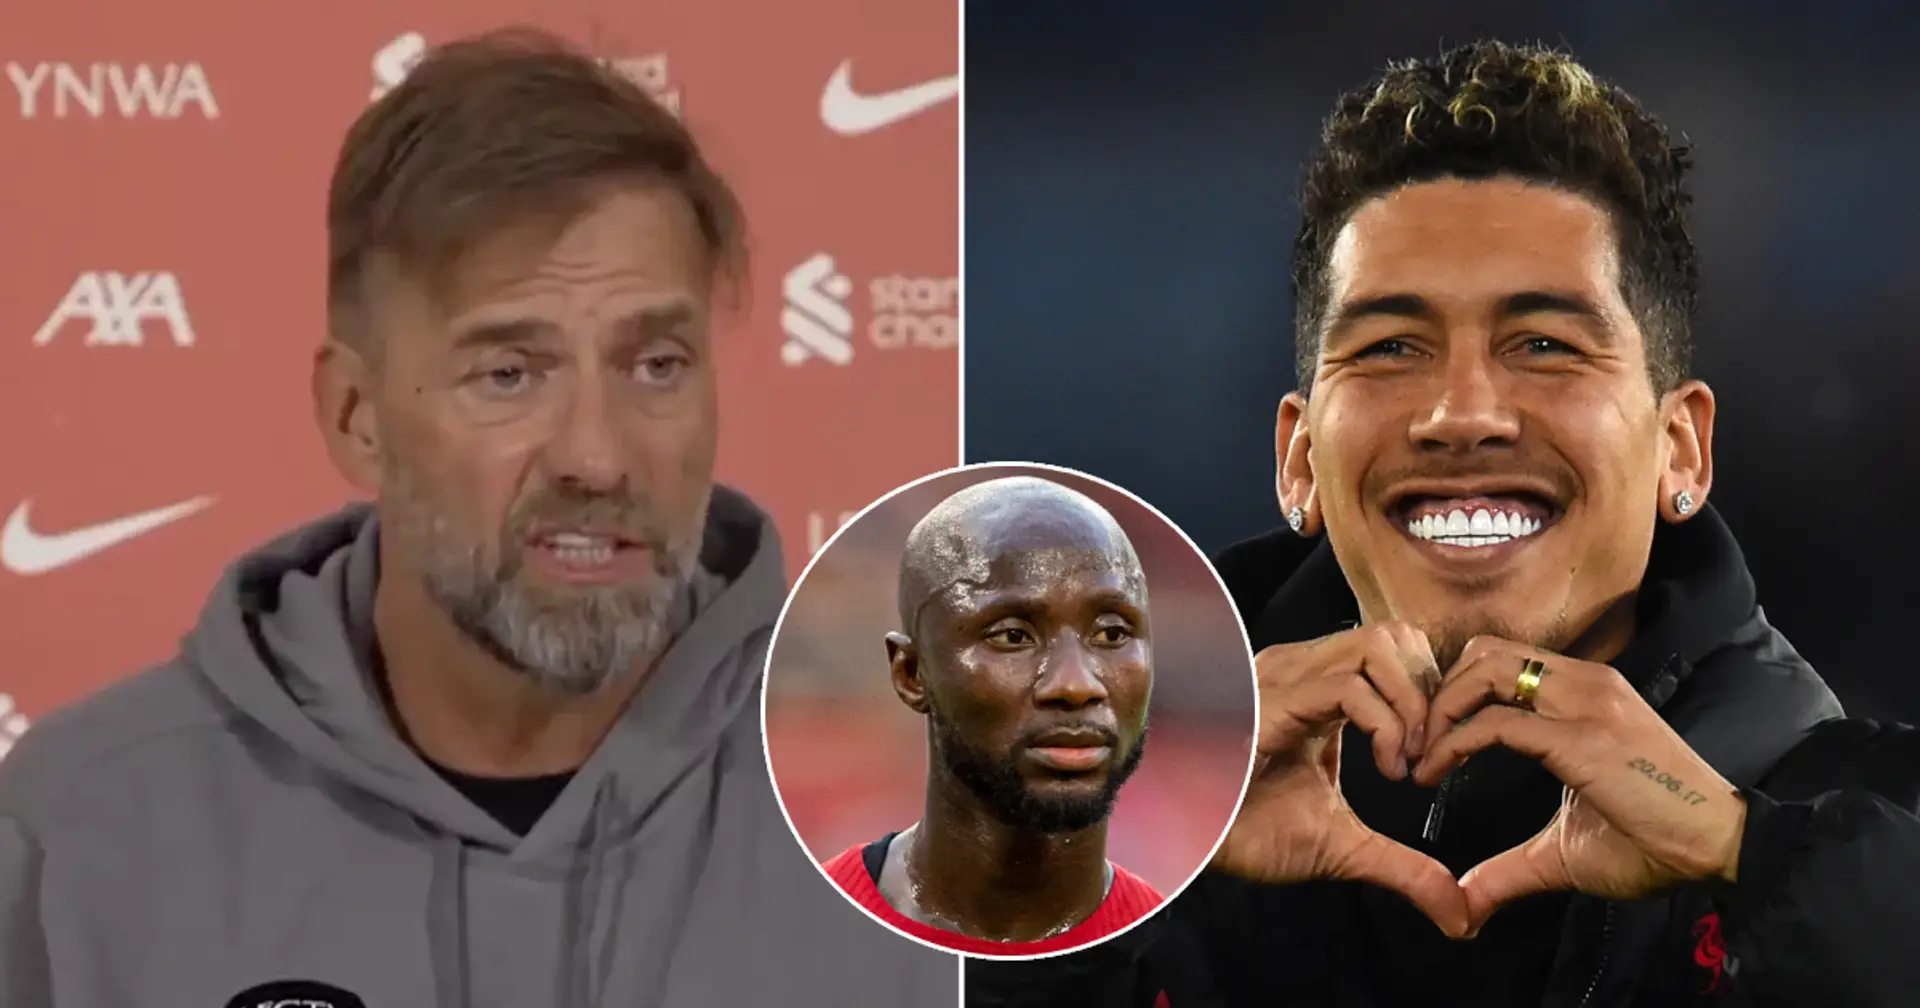 'We say goodbye to four Liverpool legends': Klopp expects emotional scenes after Aston Villa game